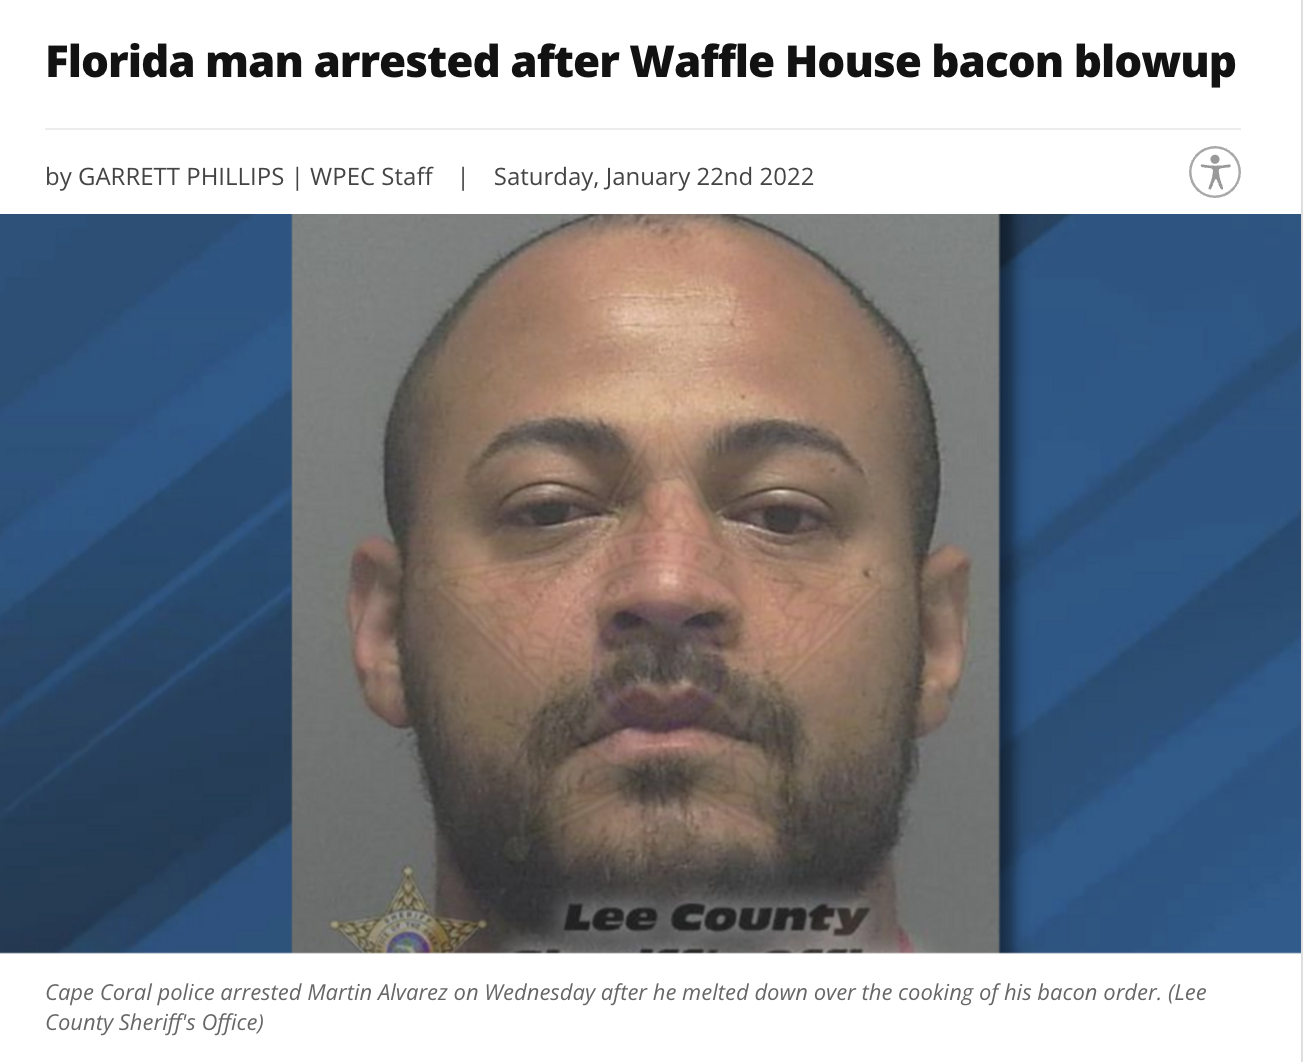 Not surprised that Waffle House was involved.